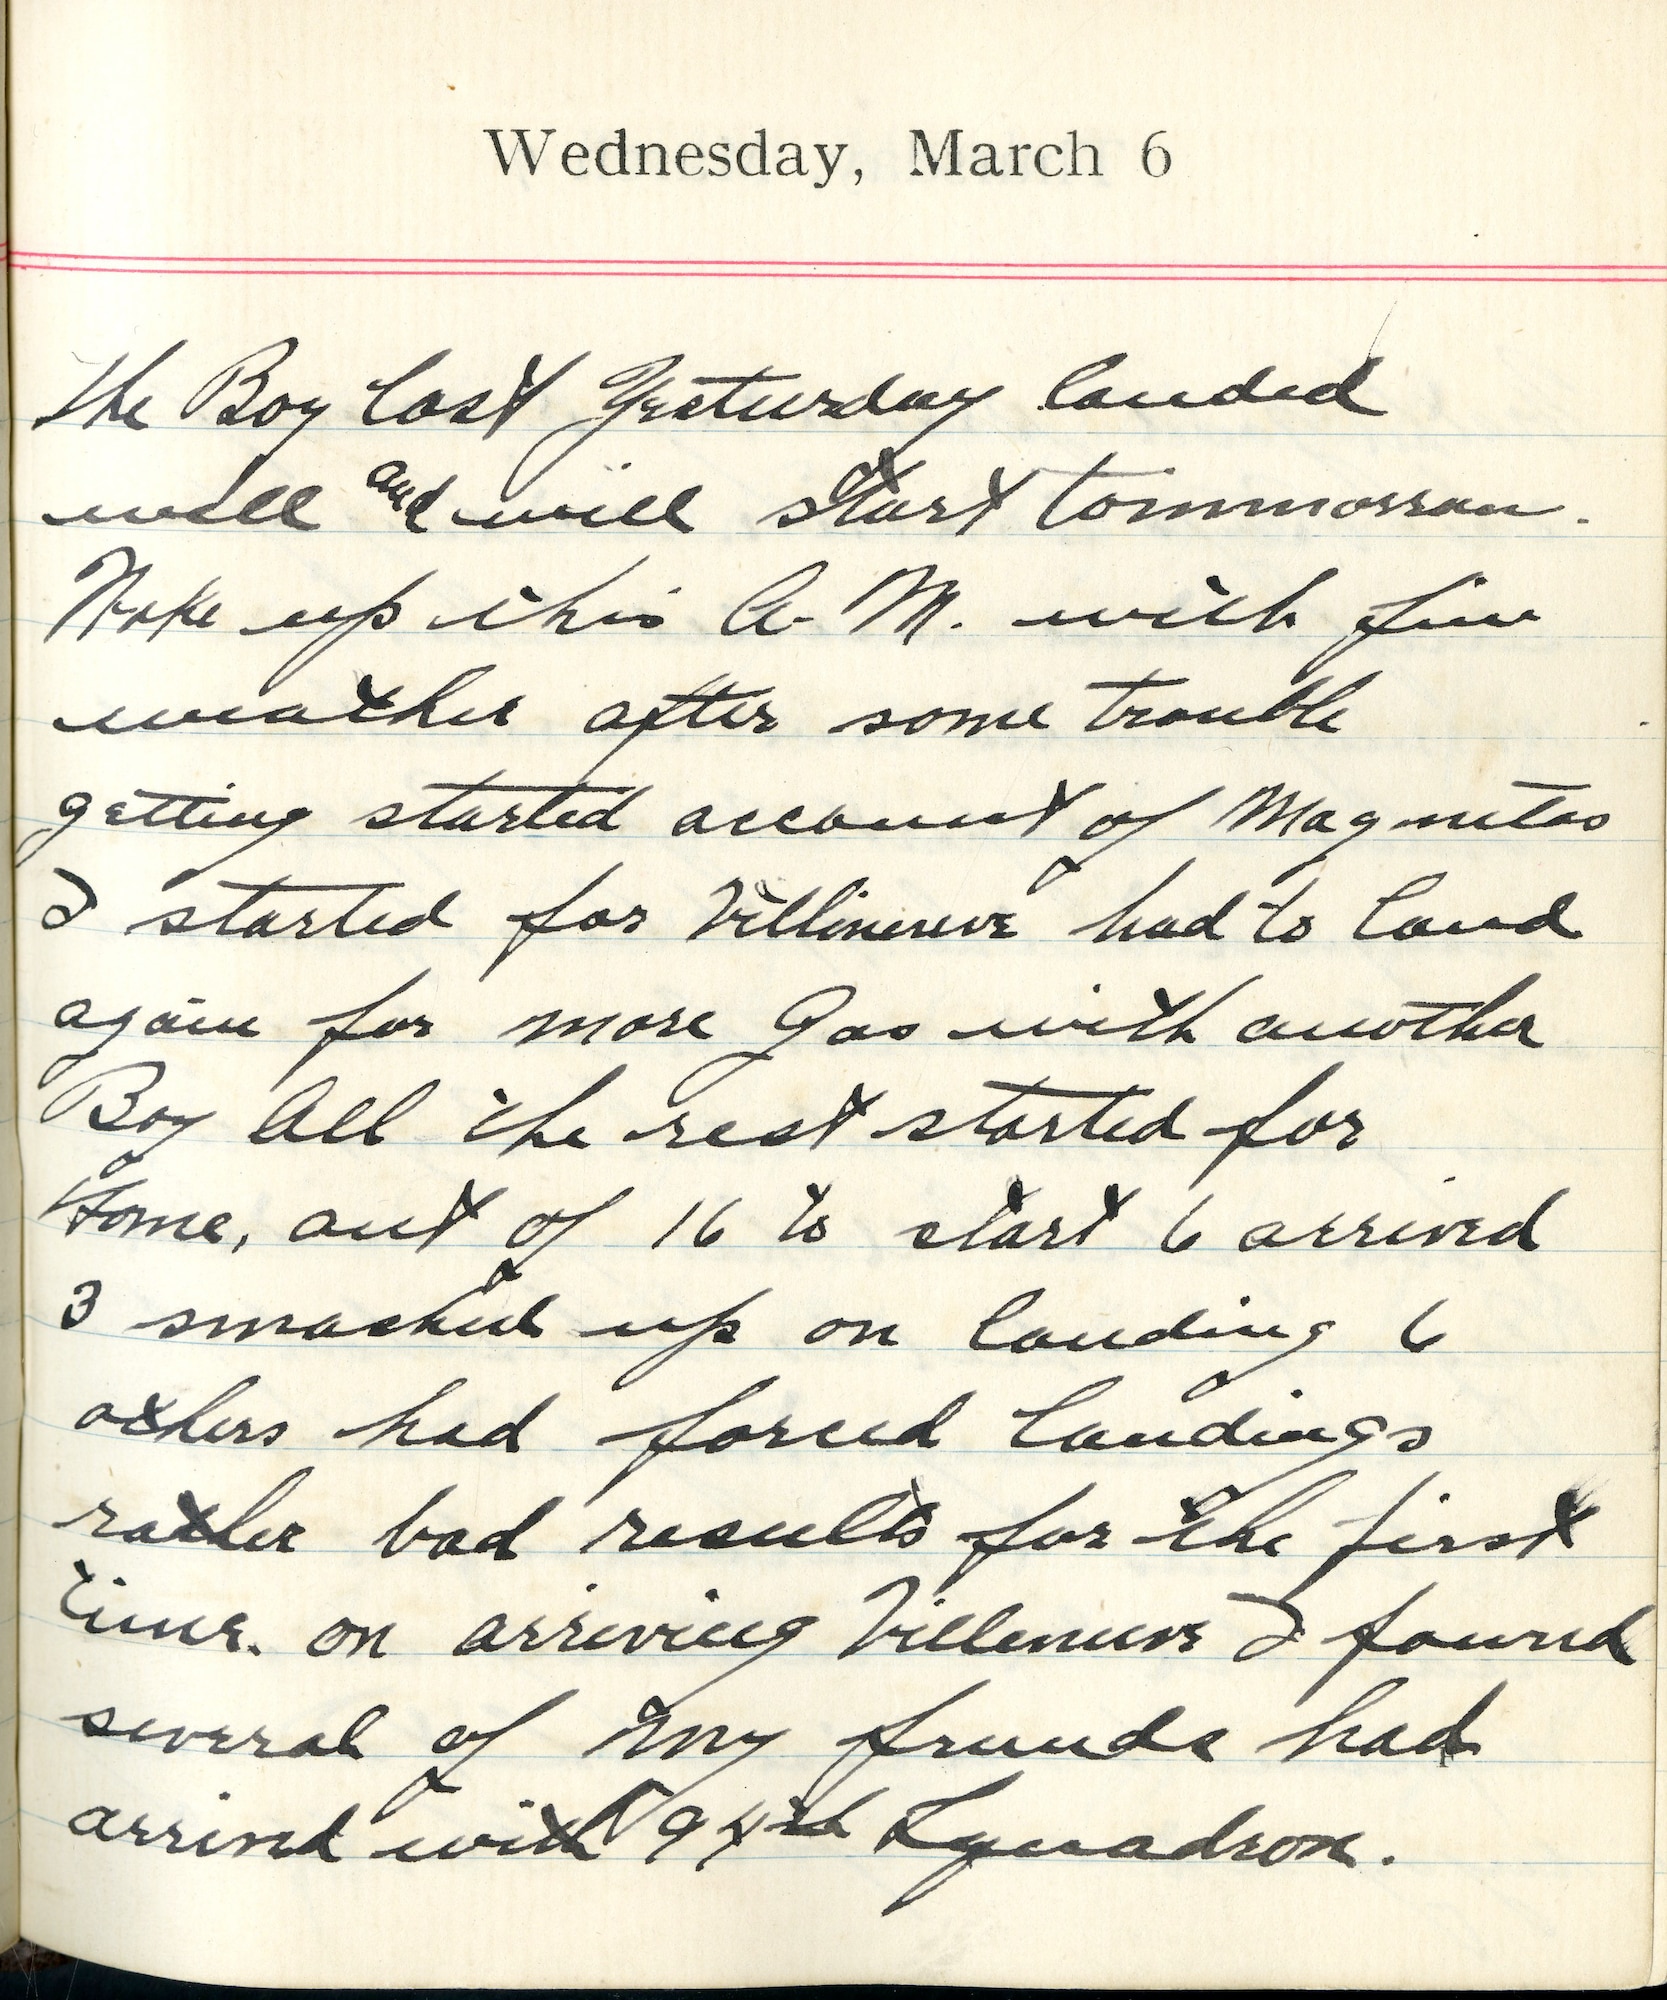 Capt. Edward V. Rickenbacker's 1918 wartime diary entry. (03/06/1918).

The Boy lost yesterday landed well and will start tomorrow.  Woke up this A.M. with fine weather after some trouble getting started [on] account of Magnetos.  I started for Villeneuve.  Had to land again for more gas with another Boy.  All the rest started for home.  Out of 16 to start, 6 arrived, 3 smashed up on landing, 6 others had forced landings.  Rather bad results for the first time.  On arriving [in] Villeneuve I found several of my friends had arrived with 94th Squadron.